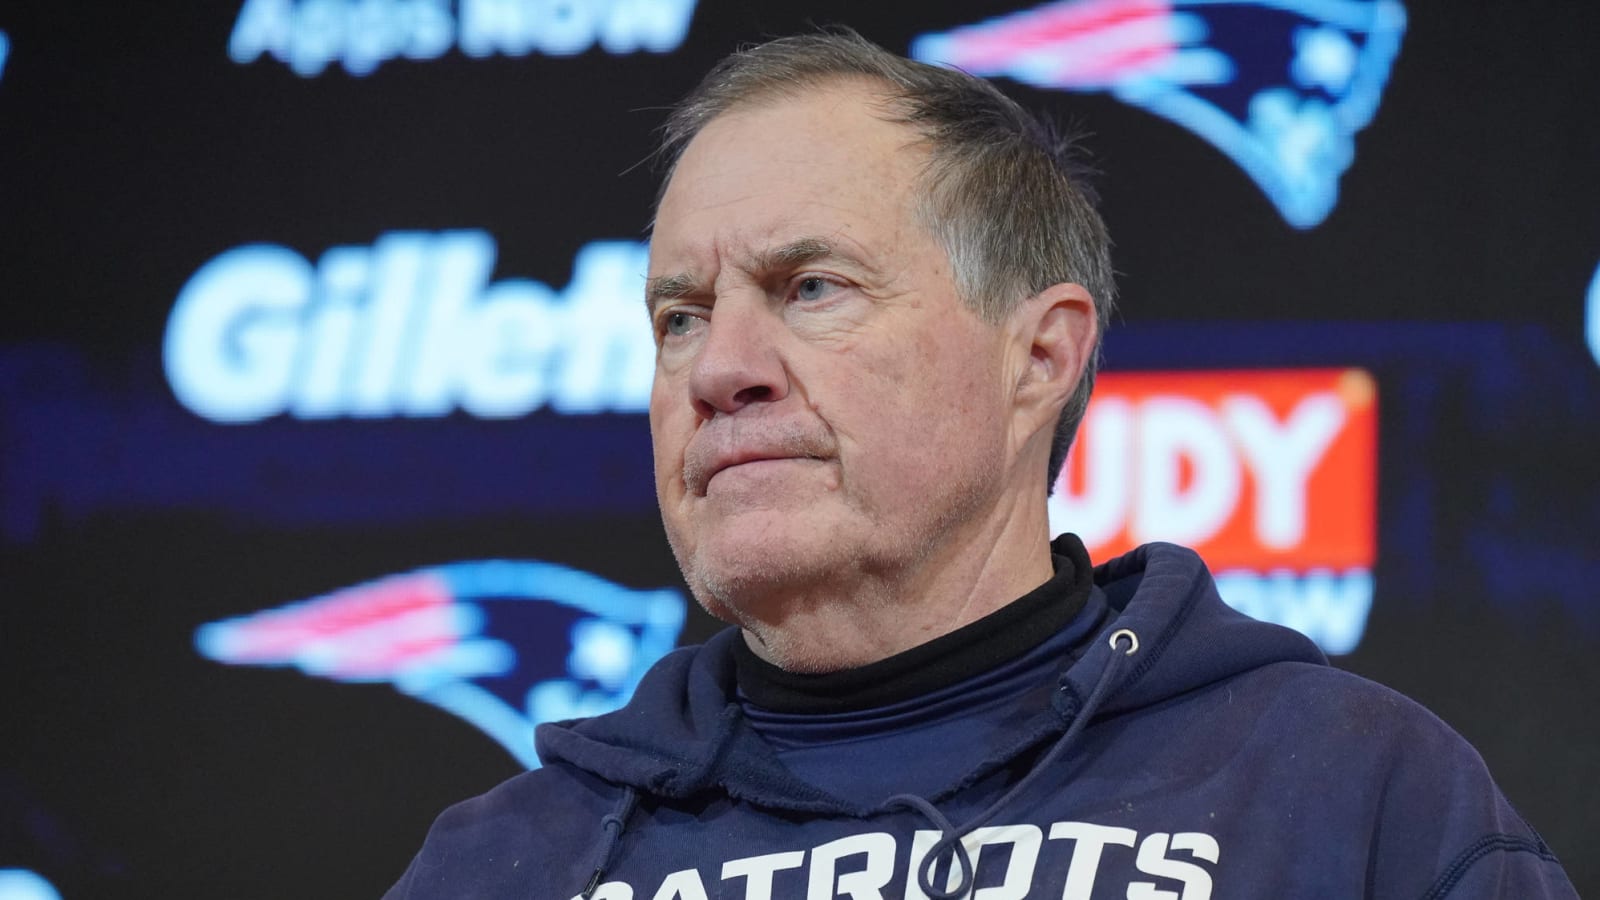 Belichick gets snippy over question about Pats’ QB situation